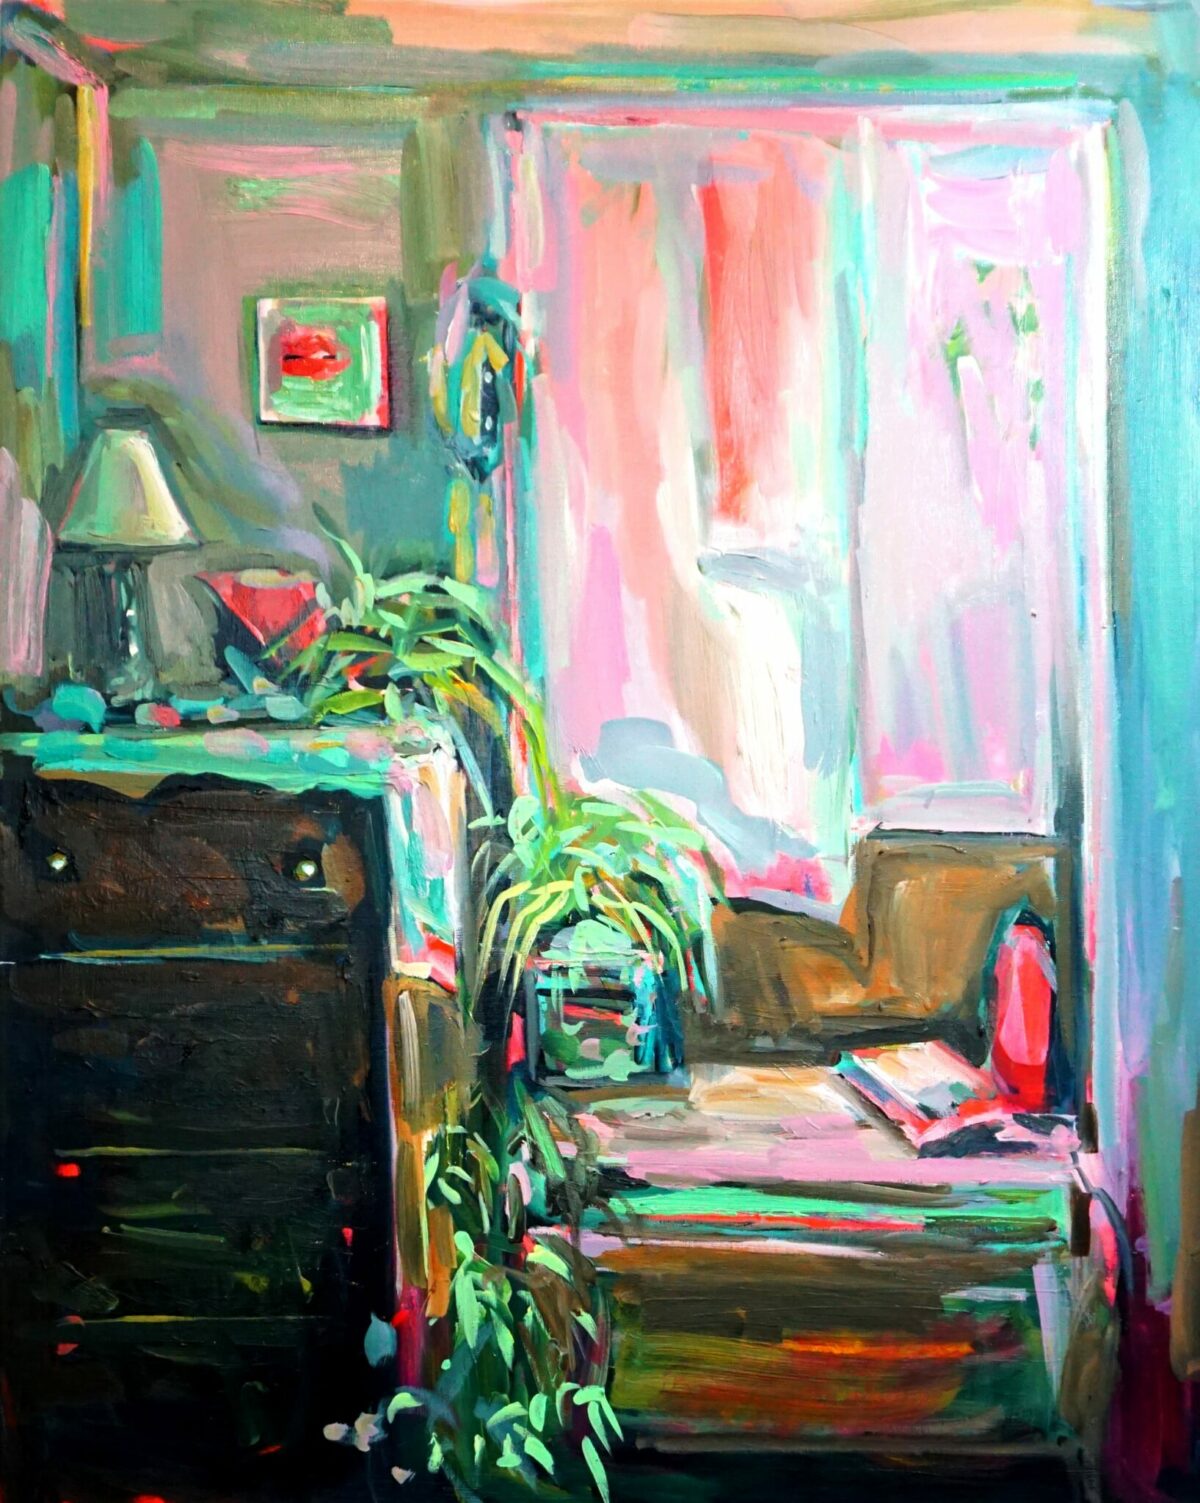 Sublime Paintings Of Intimate Home Spaces By Ekaterina Popova 9